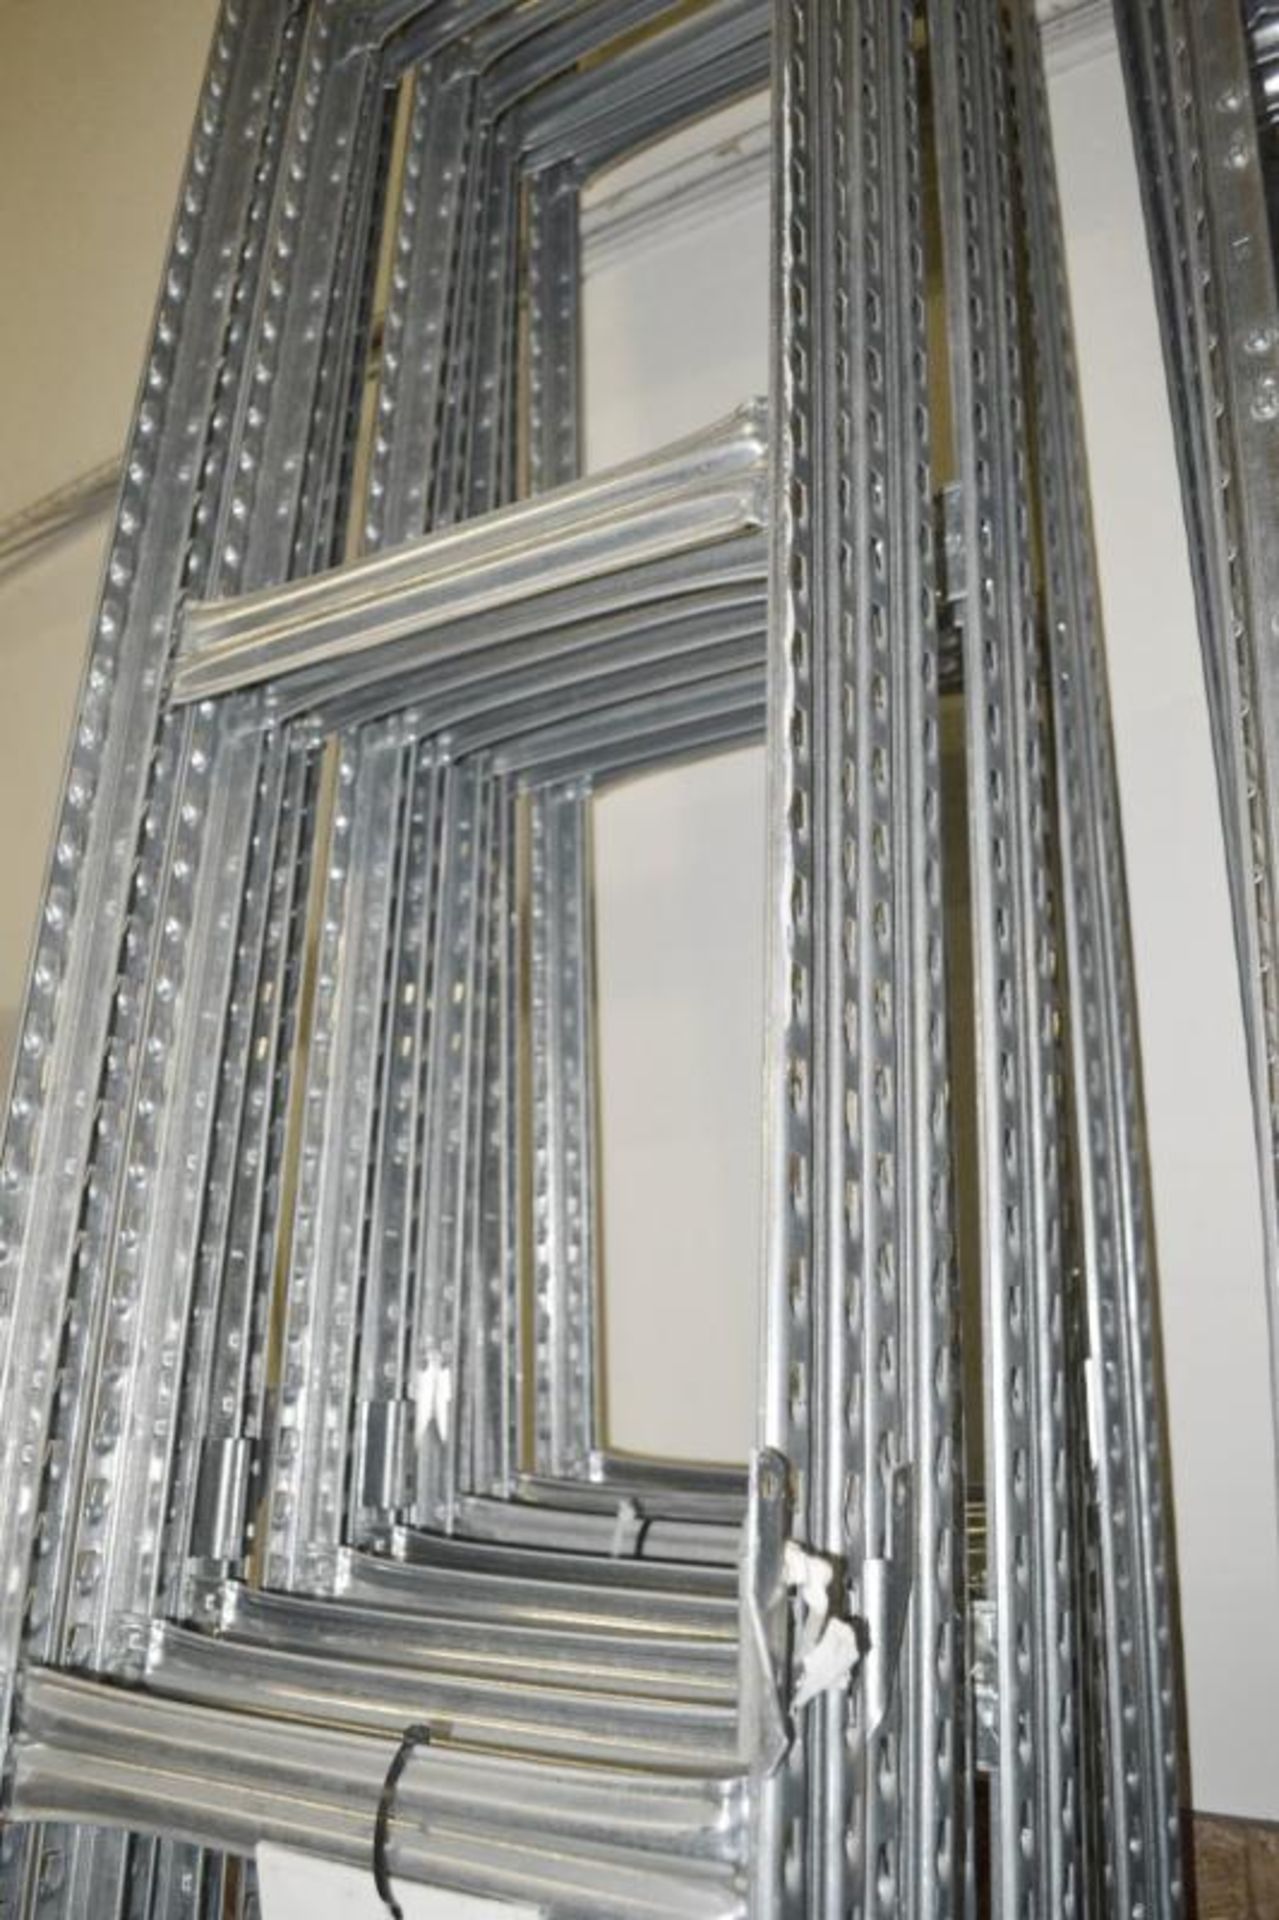 4 x Bays of Metalsistem Steel Modular Storage Shelving - Includes 37 Pieces - Recently Removed - Image 6 of 17